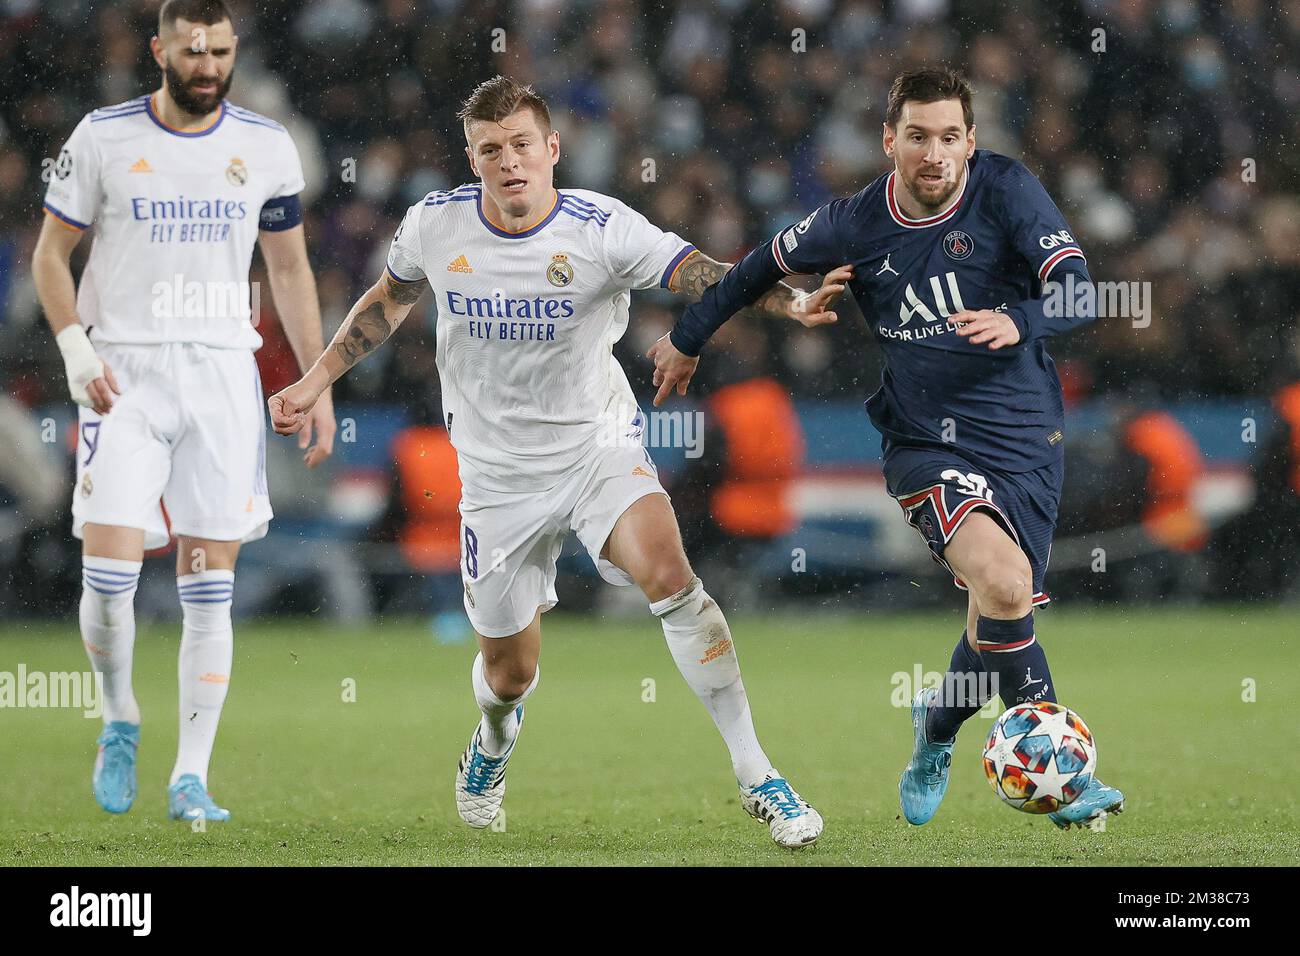 Real's Toni Kroos and PSG's Lionel Messi fight for the ball during a soccer game between French club Paris Saint-Germain and Spanish club Real Madrid, Tuesday 15 February 2022 in Paris, in the round of sisteen (1/8 final) of the UEFA Champions League. BELGA PHOTO BRUNO FAHY Stock Photo